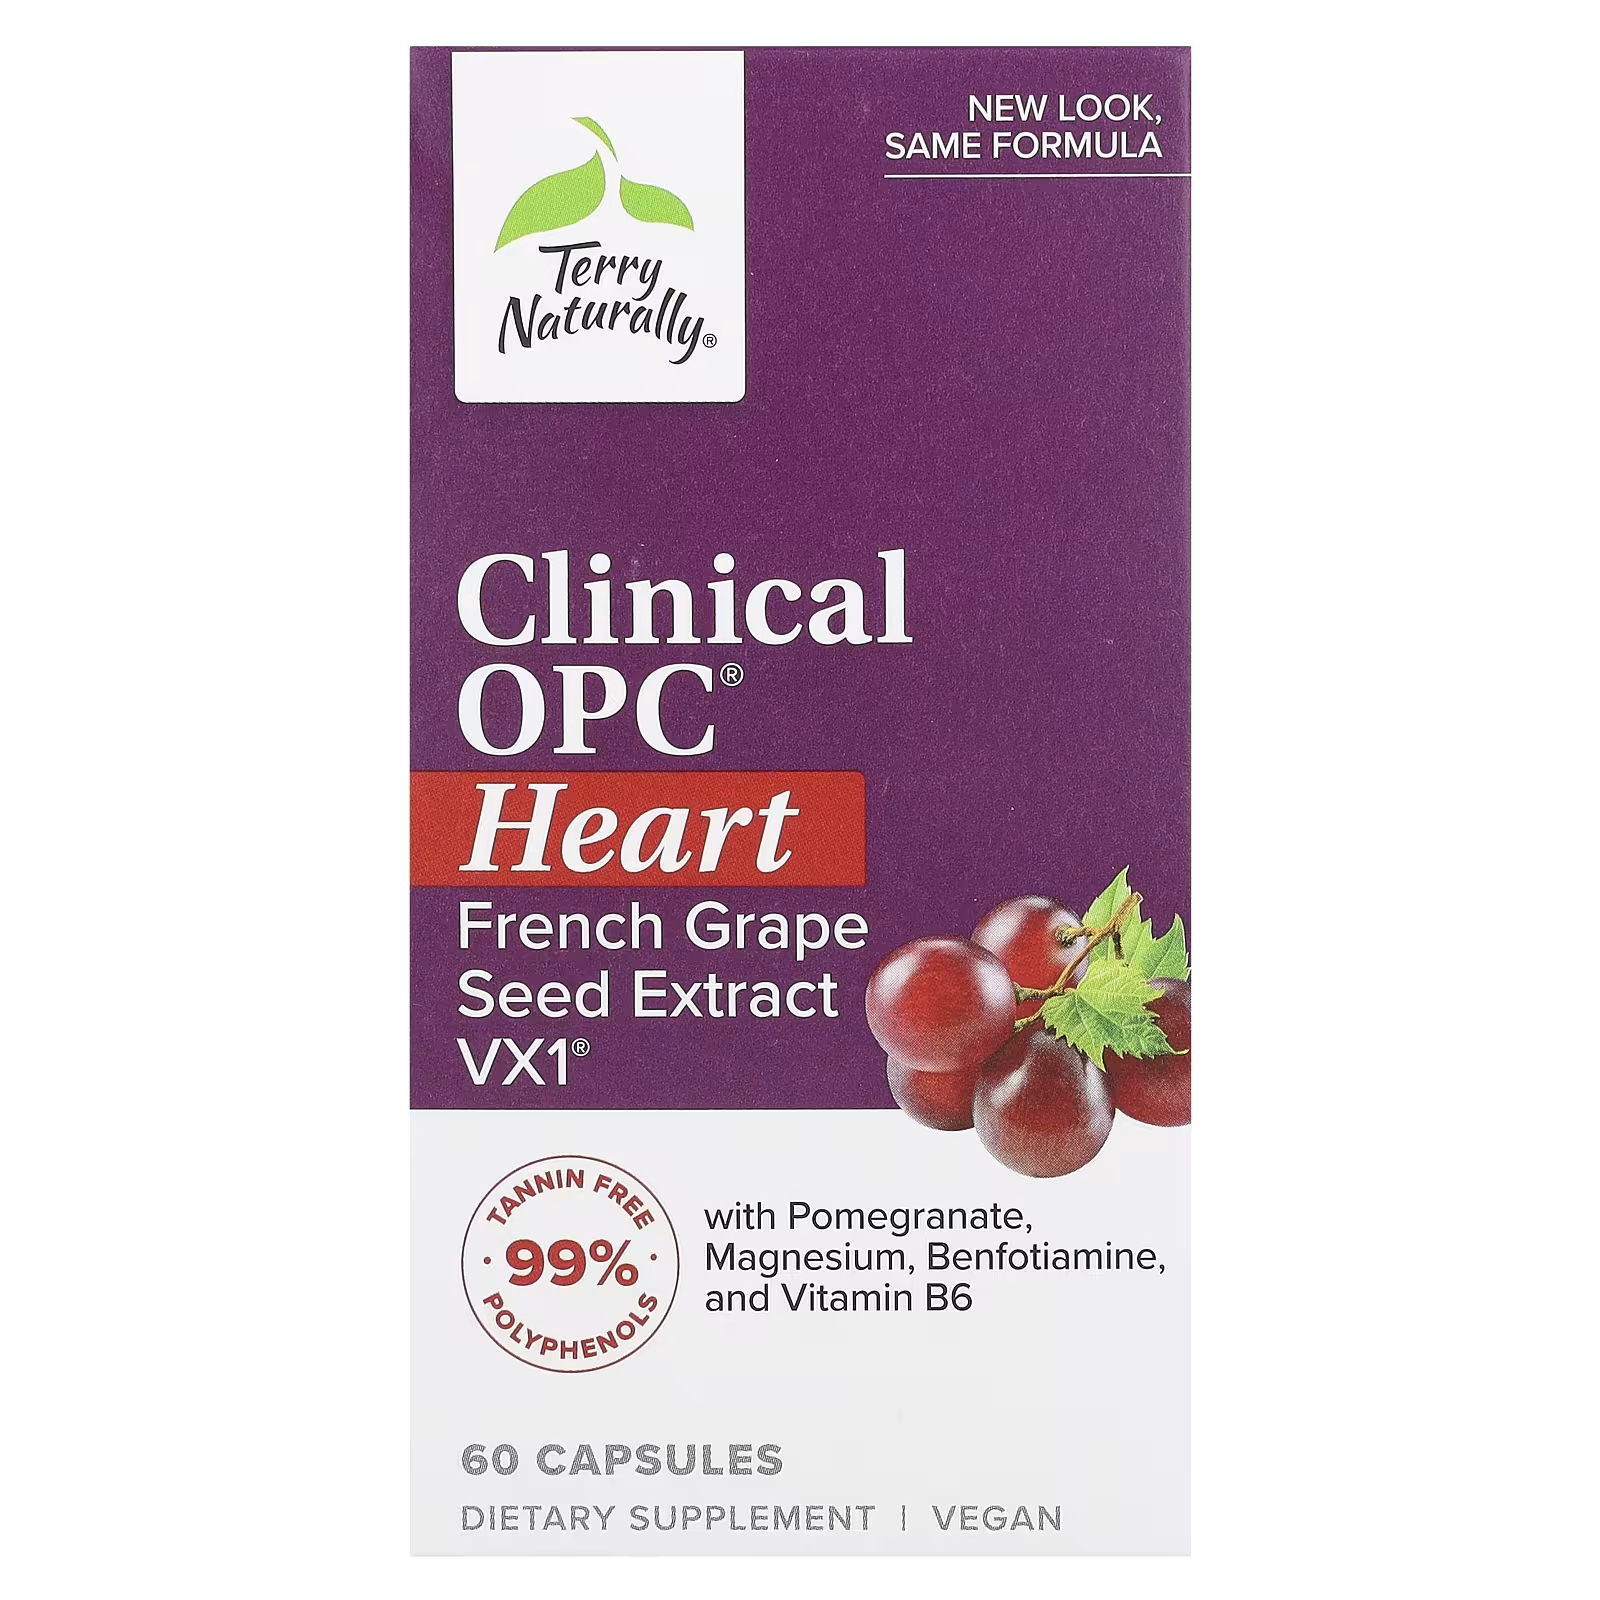 Terry Naturally Clinical OPC Heart 60 капсул terry naturally clinical opc 300 мг 60 капсул